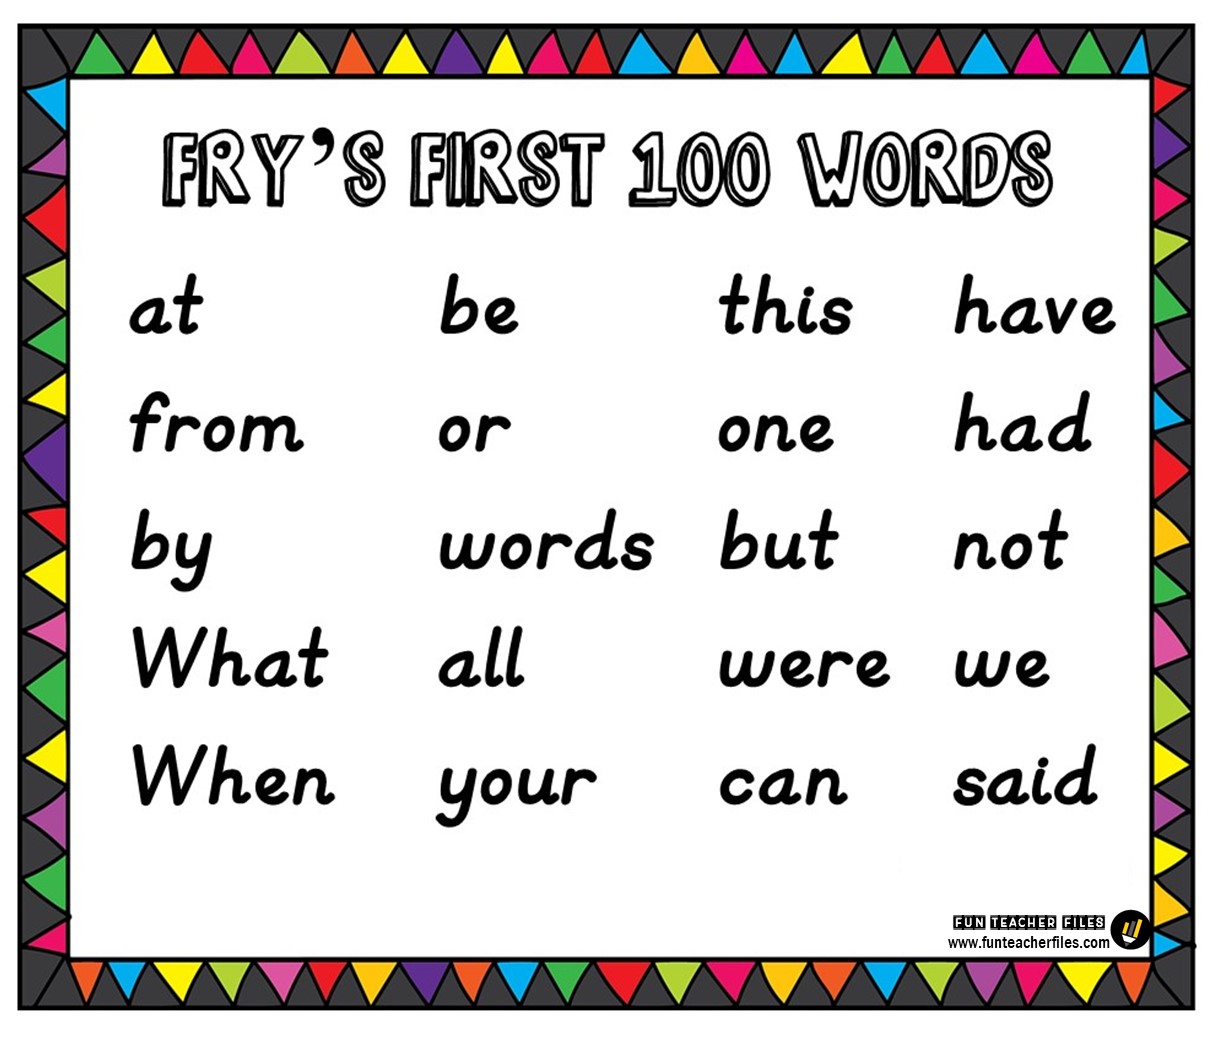 fry sight words by grade level